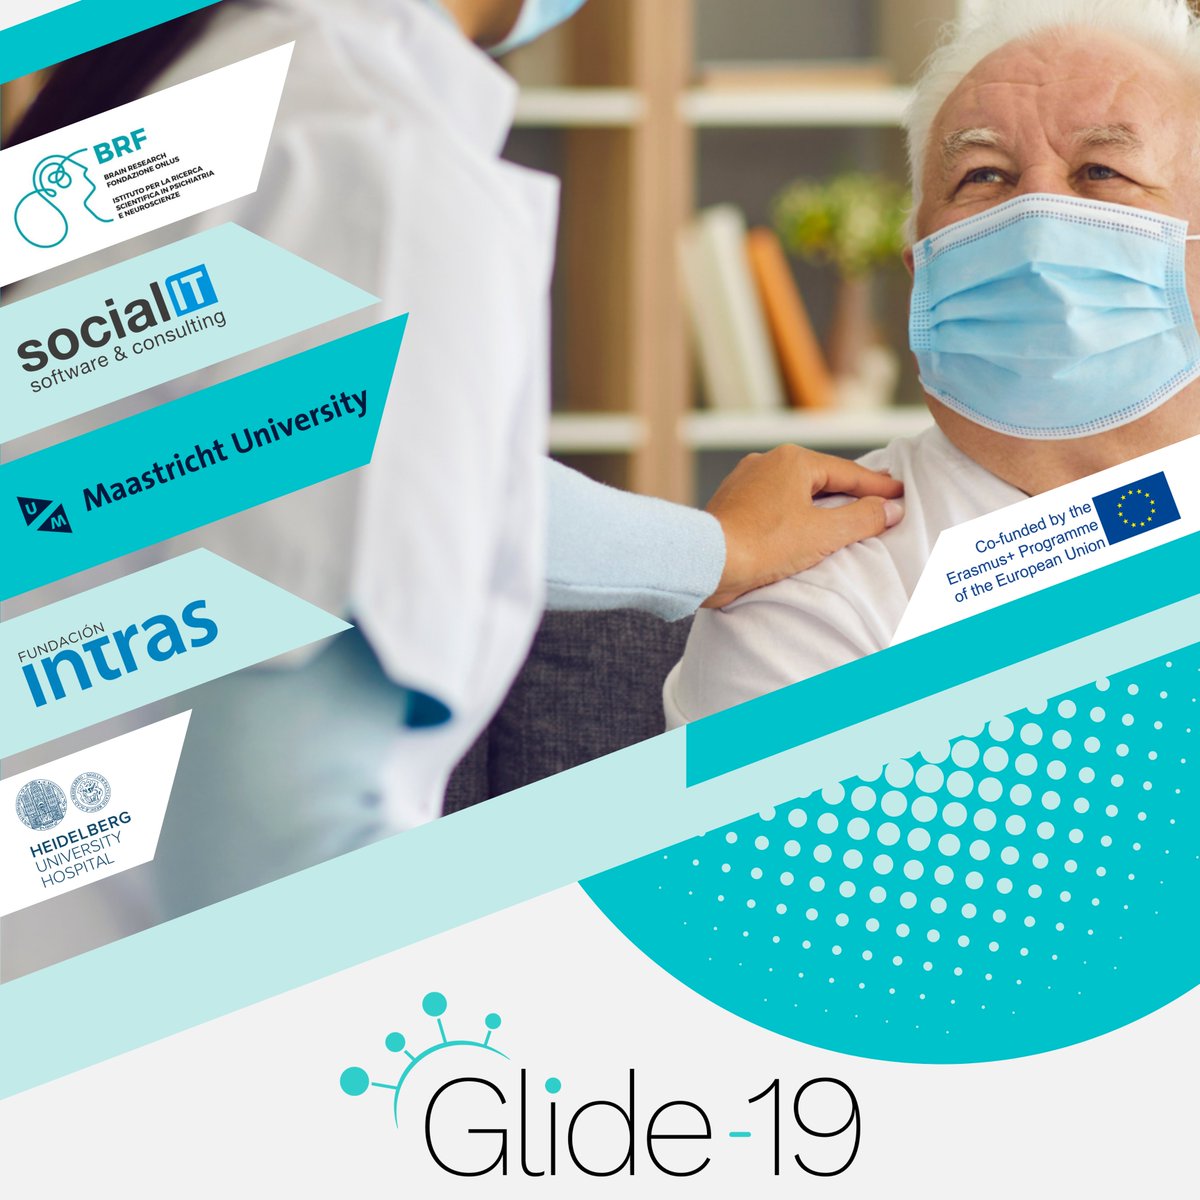 Train the Trainers!
Join us on April 16-17 as health workers from #Italy, #Spain, #Netherlands, and #Germany will gather in #Heidelberg for an immersive exploration of the newly developed @Glide19EProject course on #pandemicpreparedness.
More info: glide19.eu